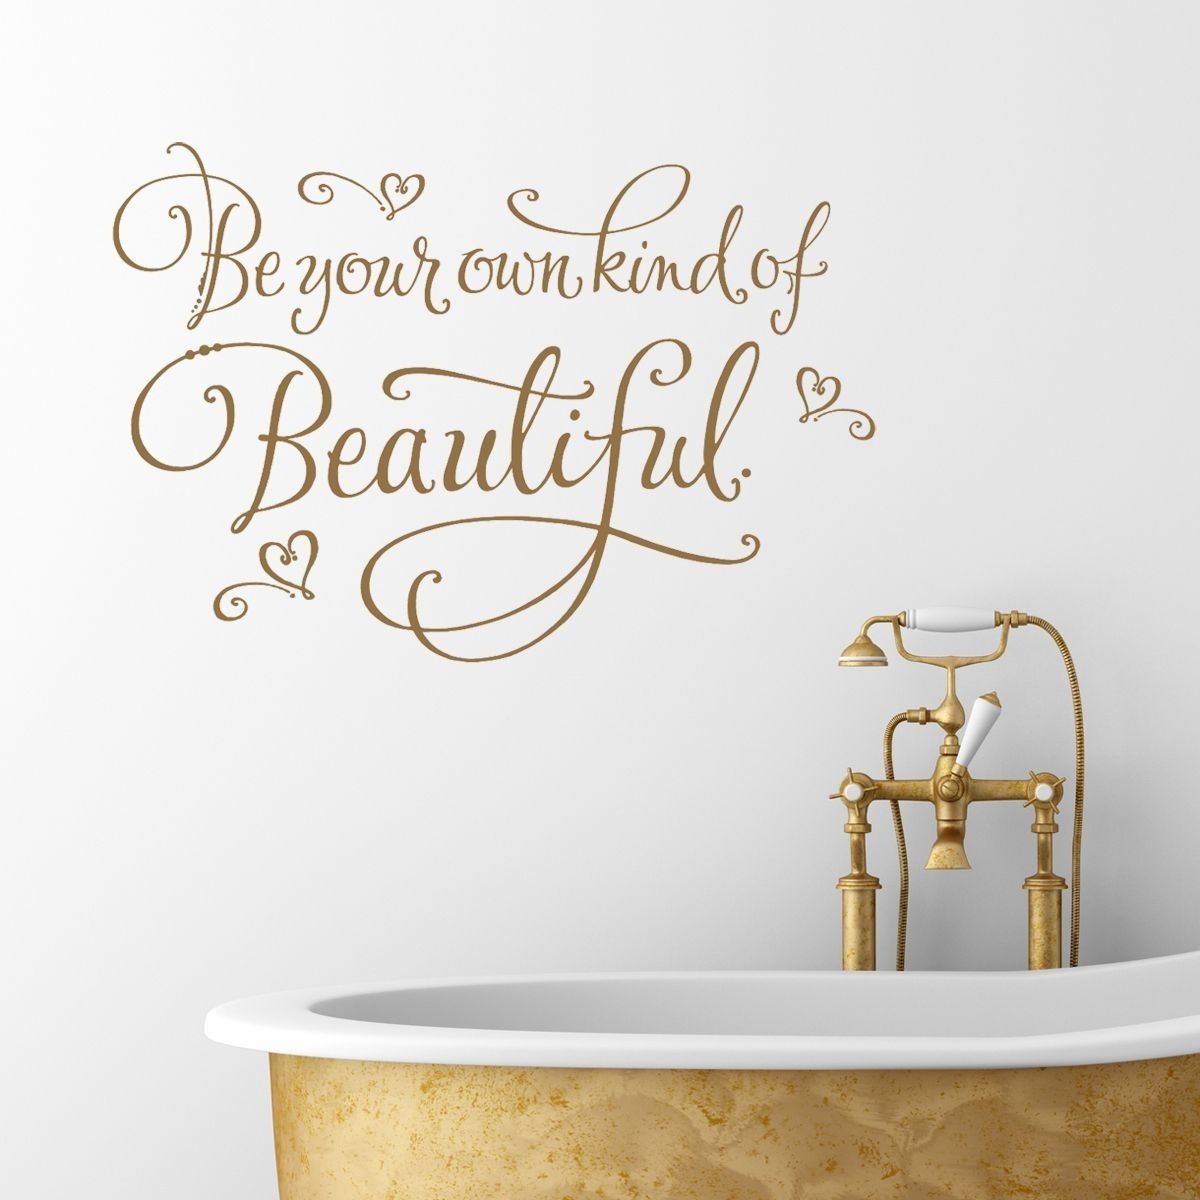 Bathroom Decals – Bedroom Wall Decor – Bathroom Decor – Be Your Own Intended For Be Your Own Kind Of Beautiful Wall Art (View 17 of 20)